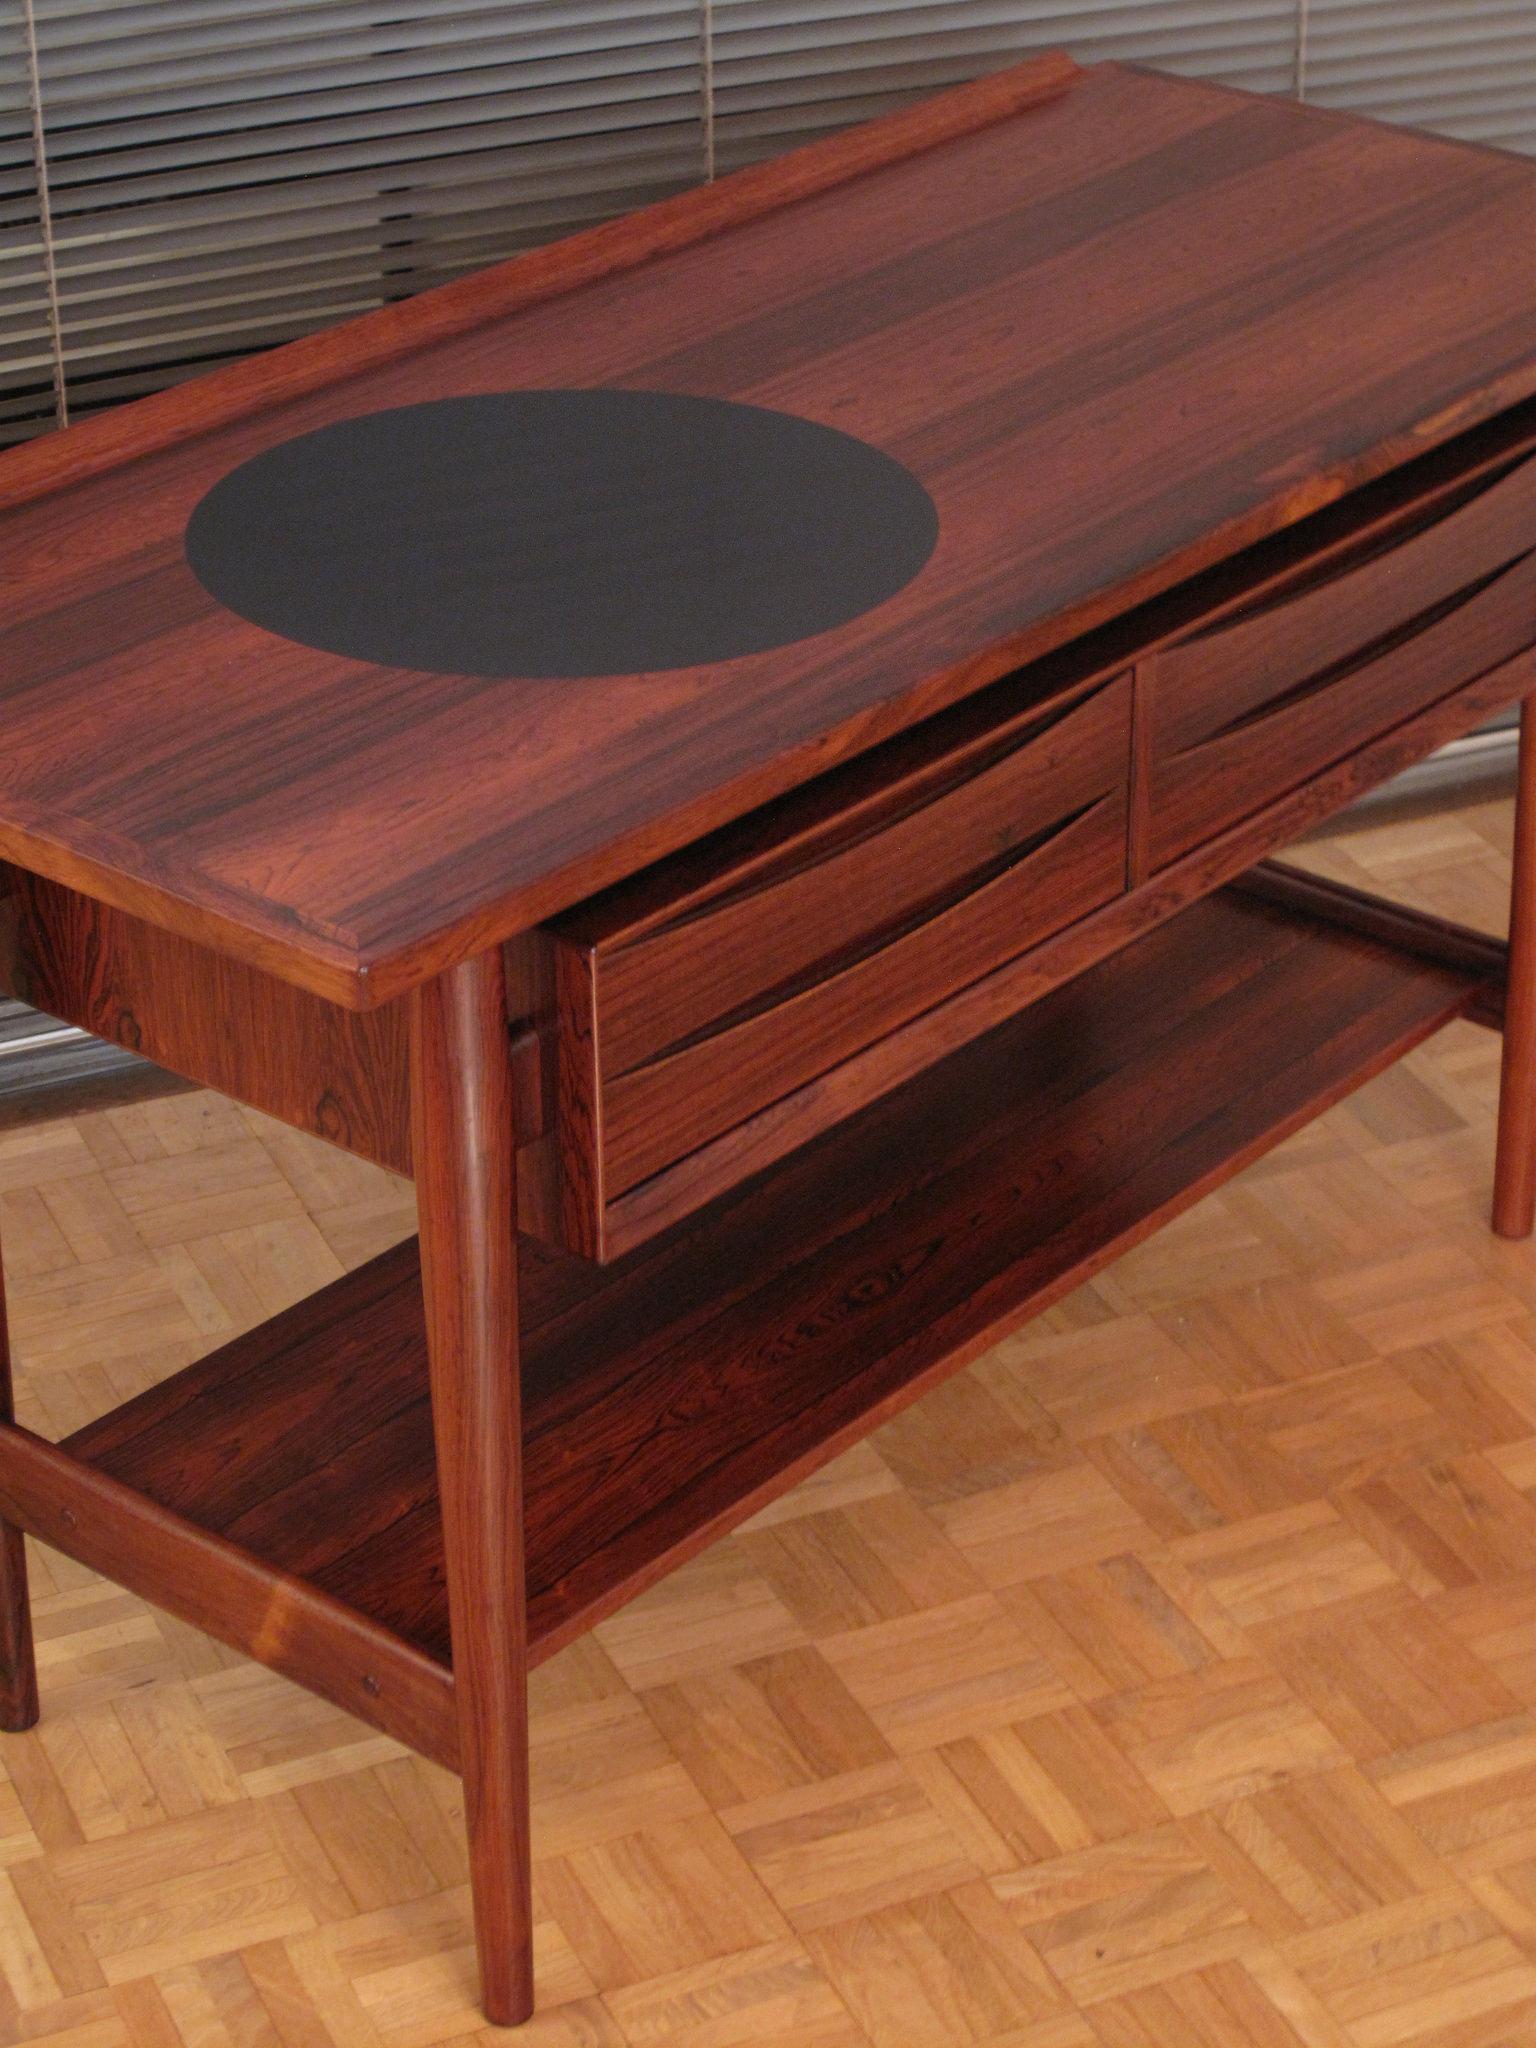 Mid-20th Century Arne Vodder Rosewood Console Table for Sibast